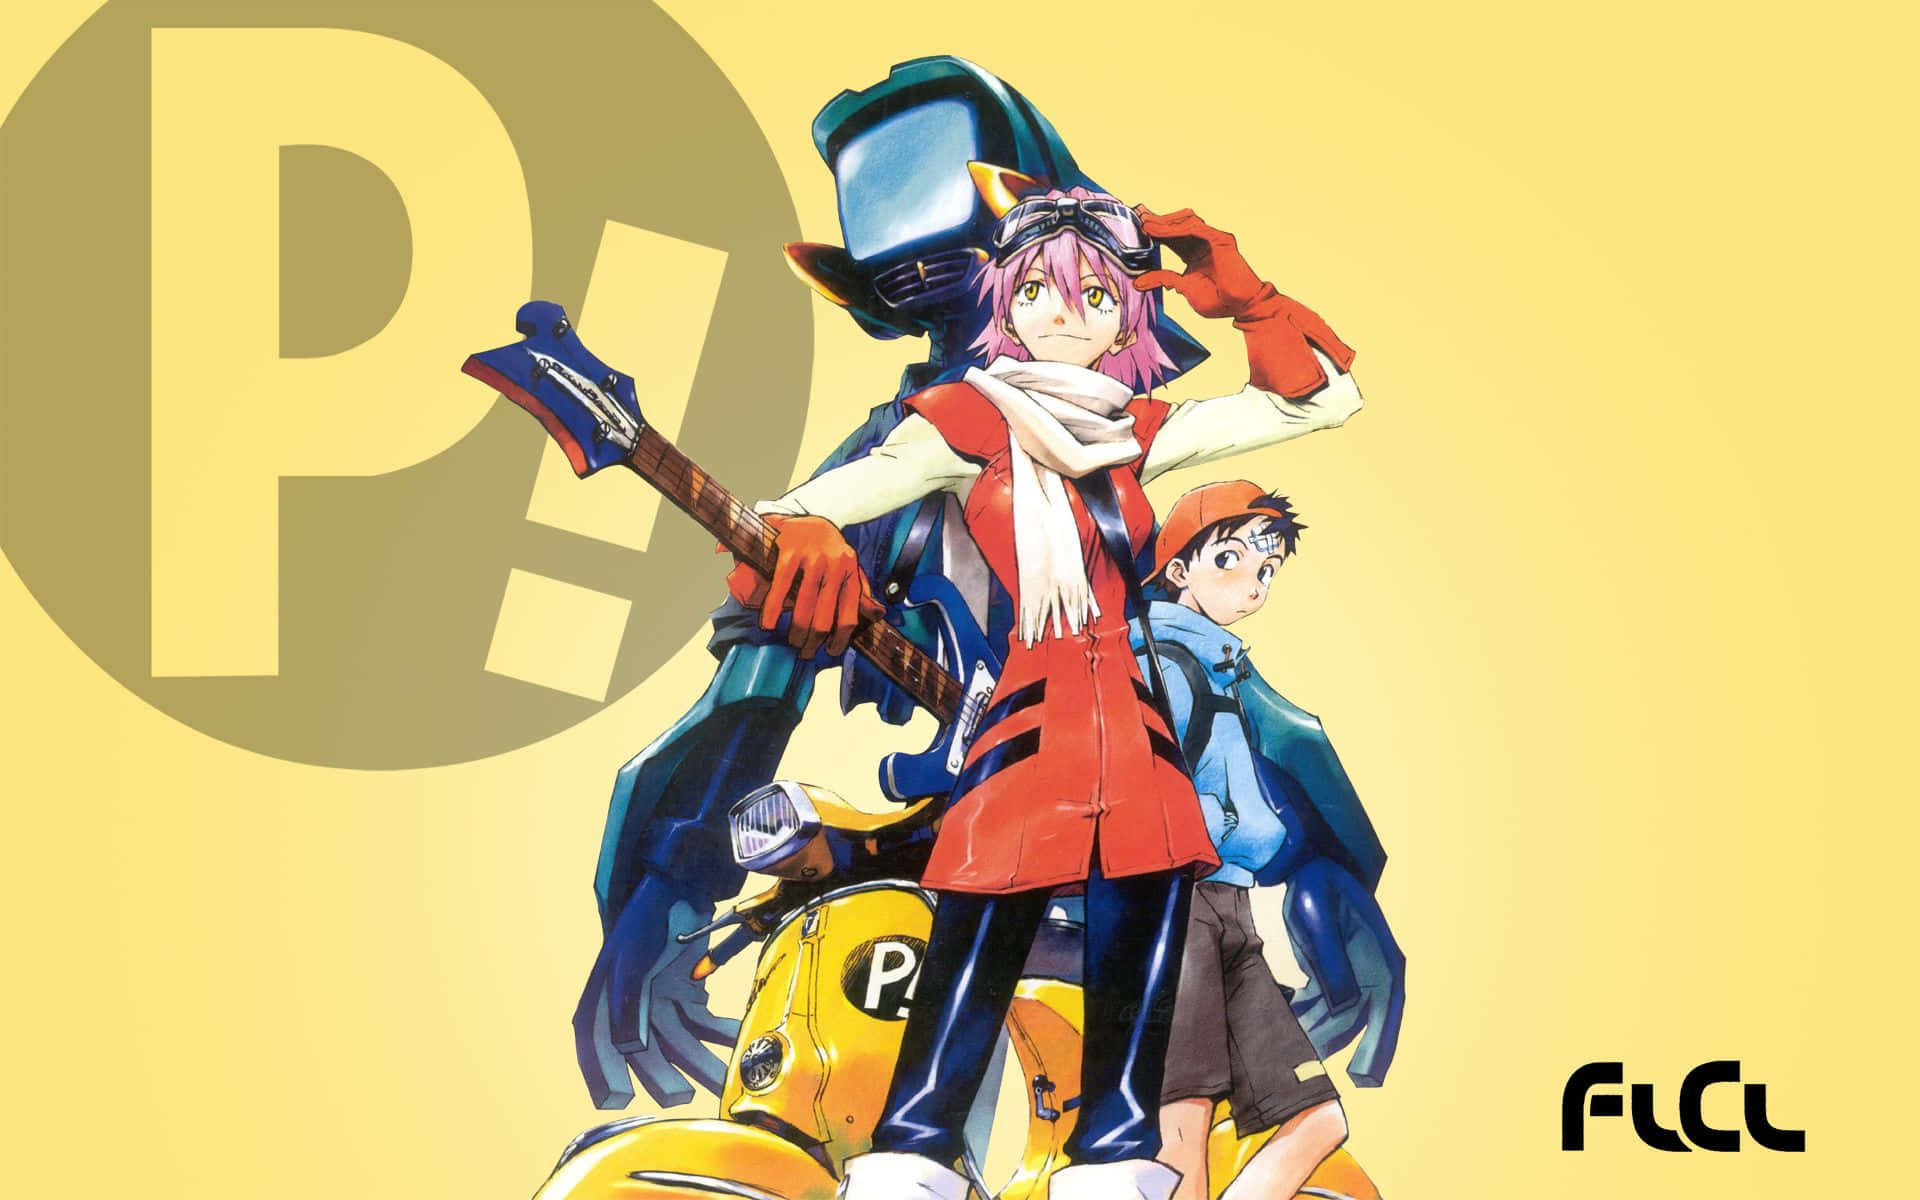 Enjoy this FLCL background wallpaper, with its intriguing characters and mix of comedy and sci-fi